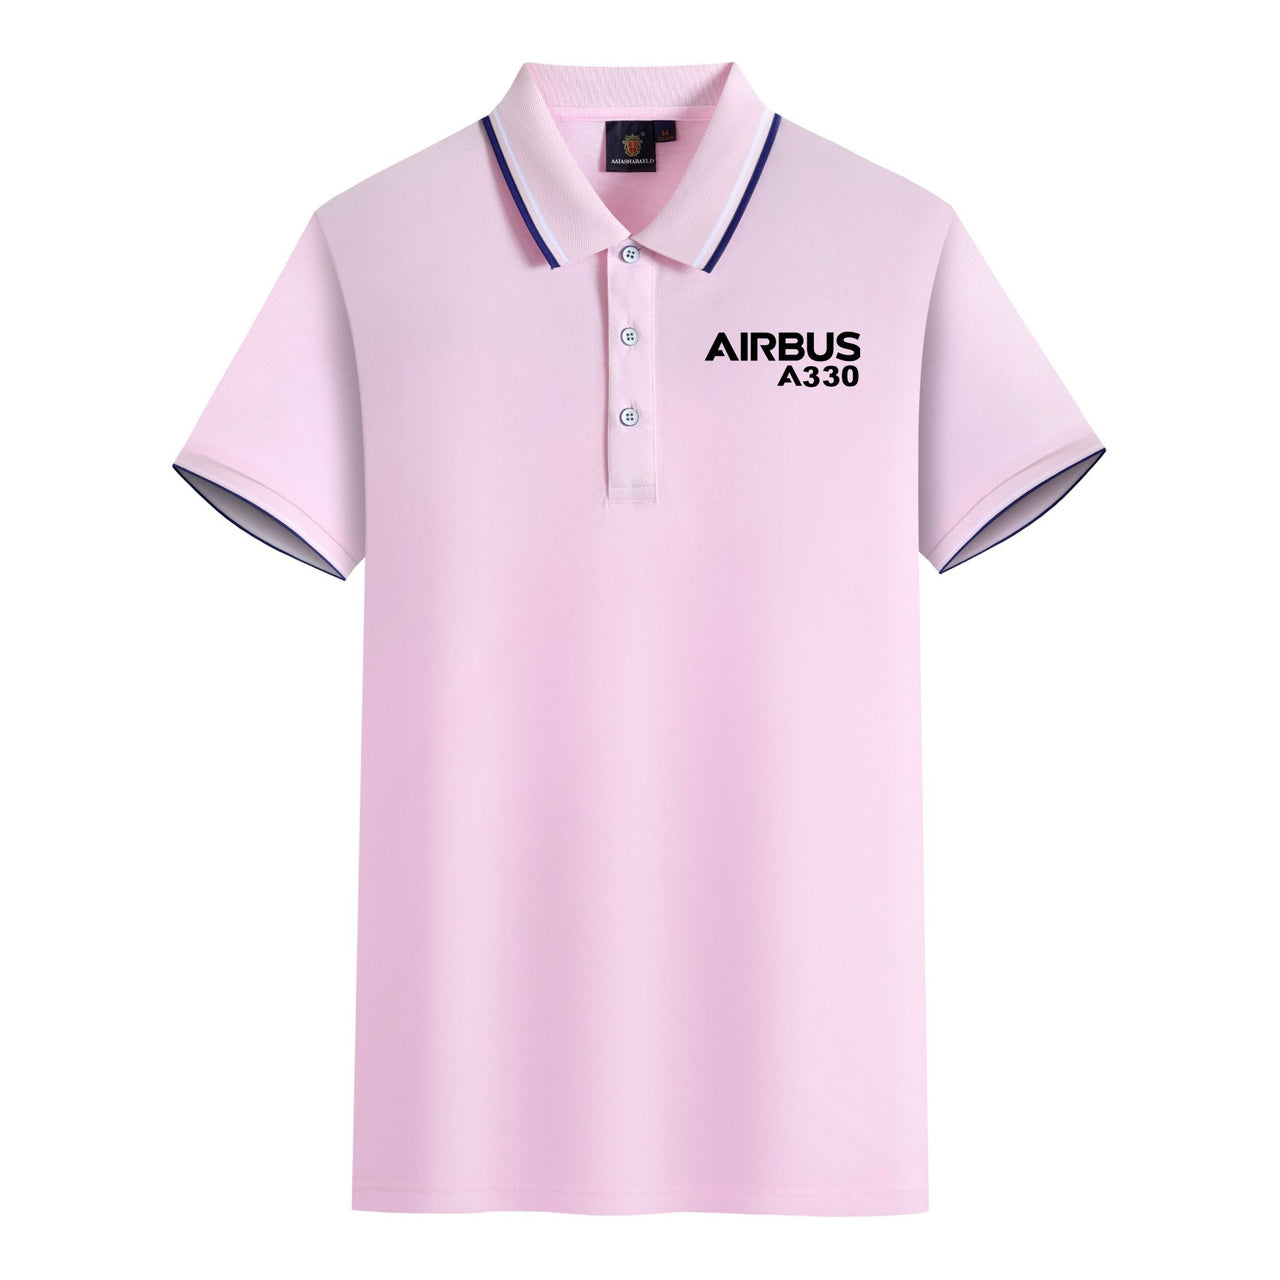 Airbus A330 & Text Designed Stylish Polo T-Shirts